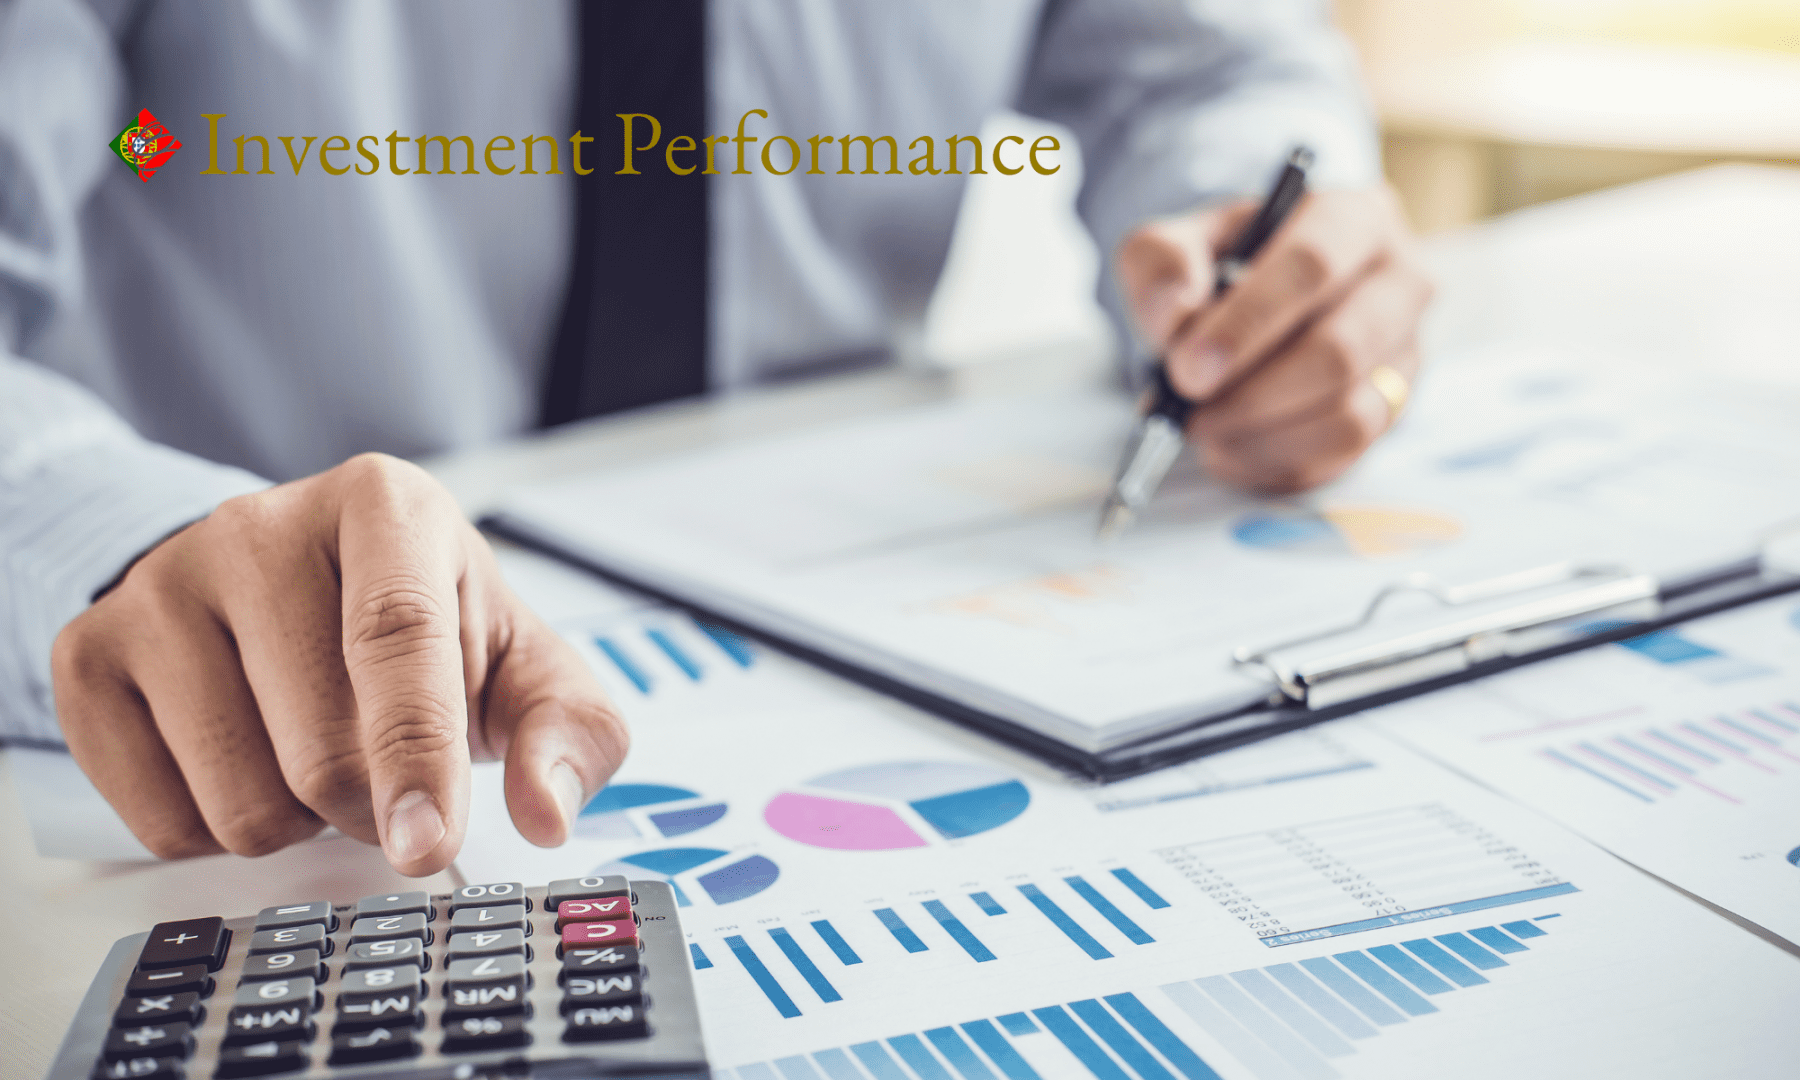 Measuring investment performance